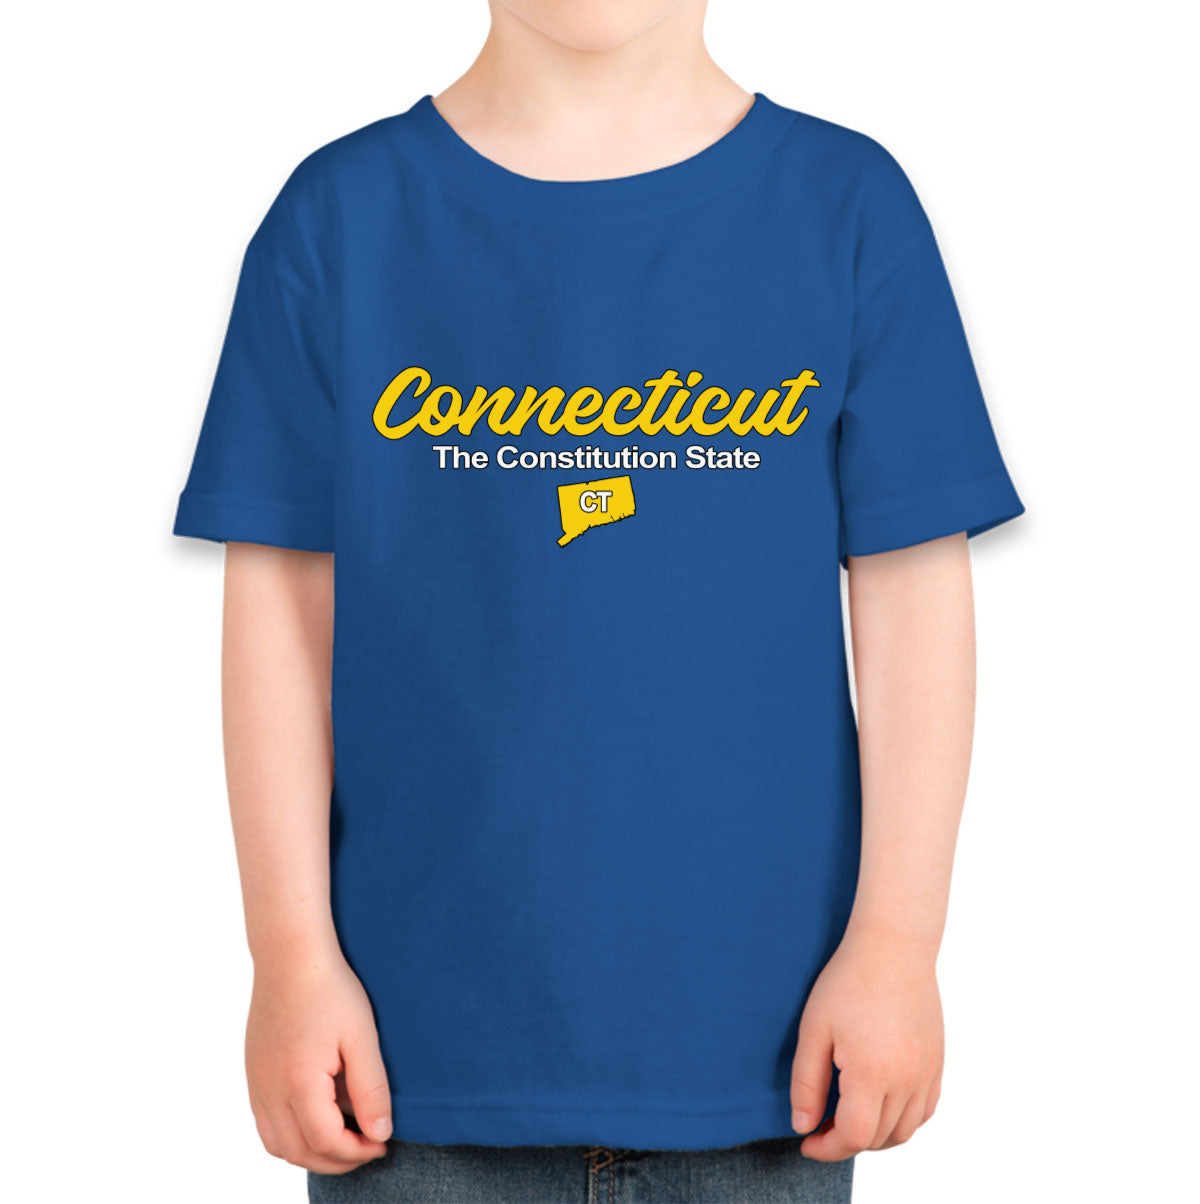 Connecticut The Constitution State Toddler T-shirt